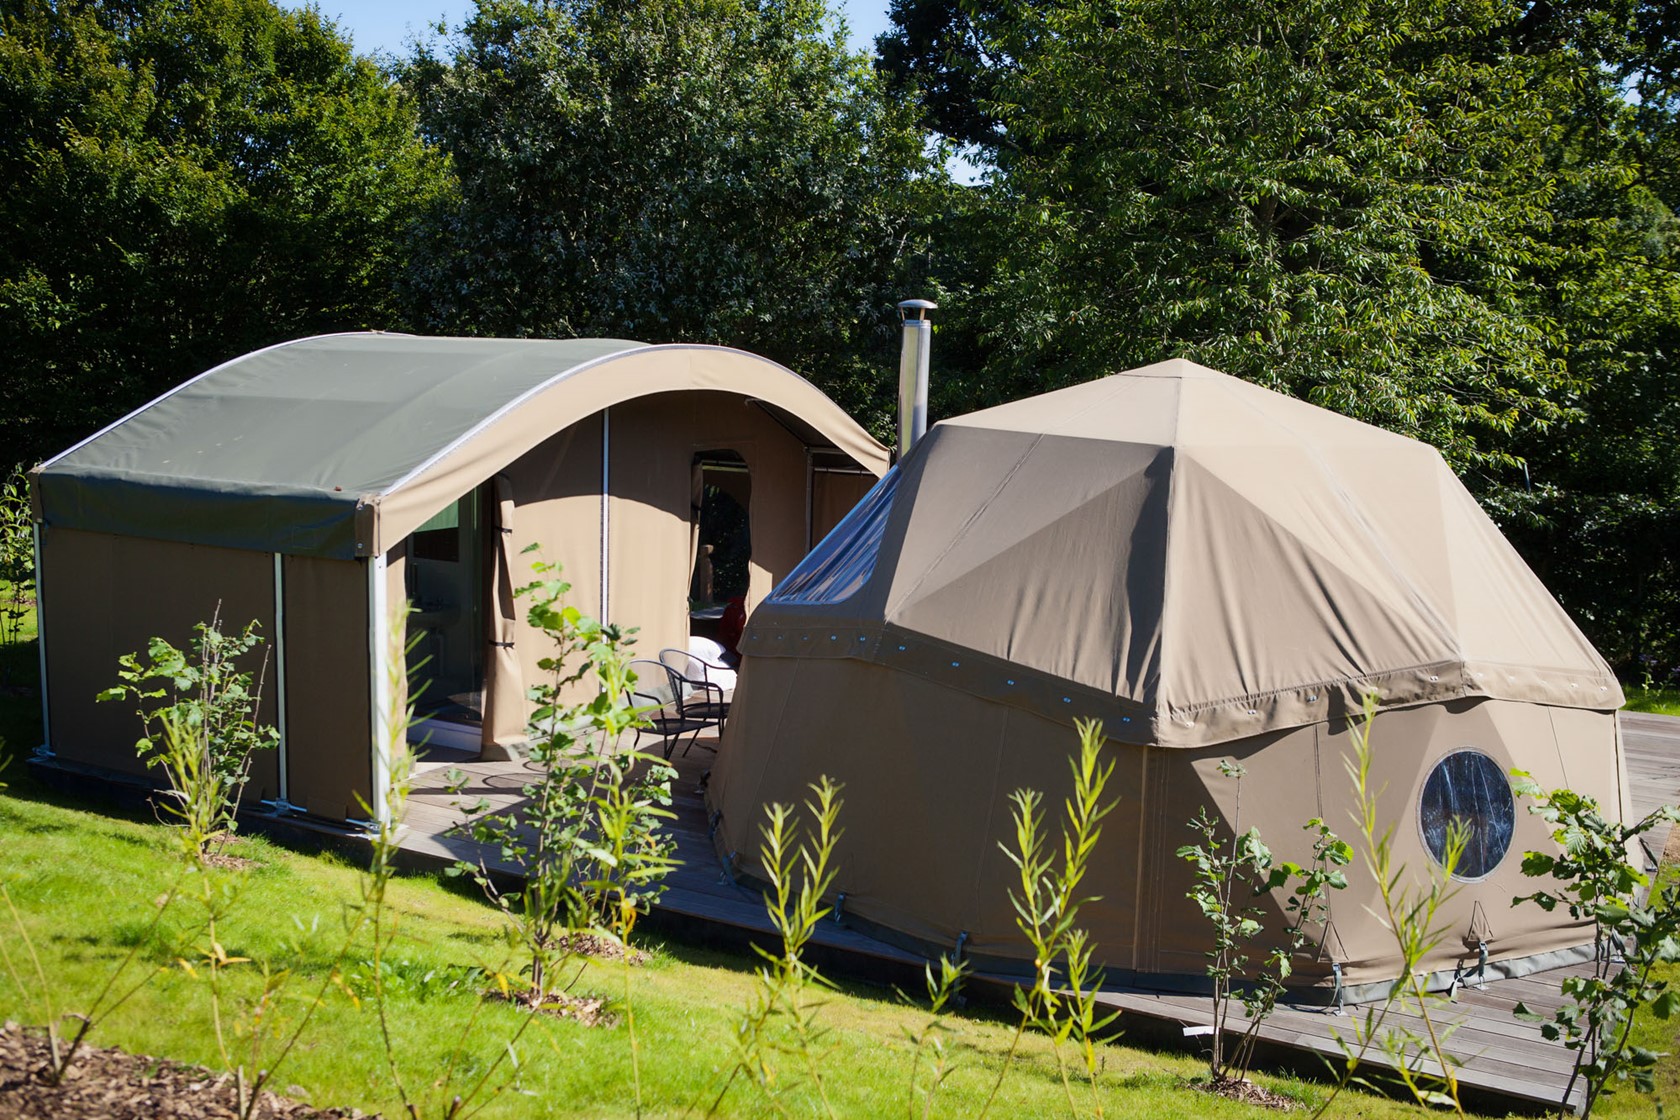 Two luxury dome tents at Durrell Wildlife Camp